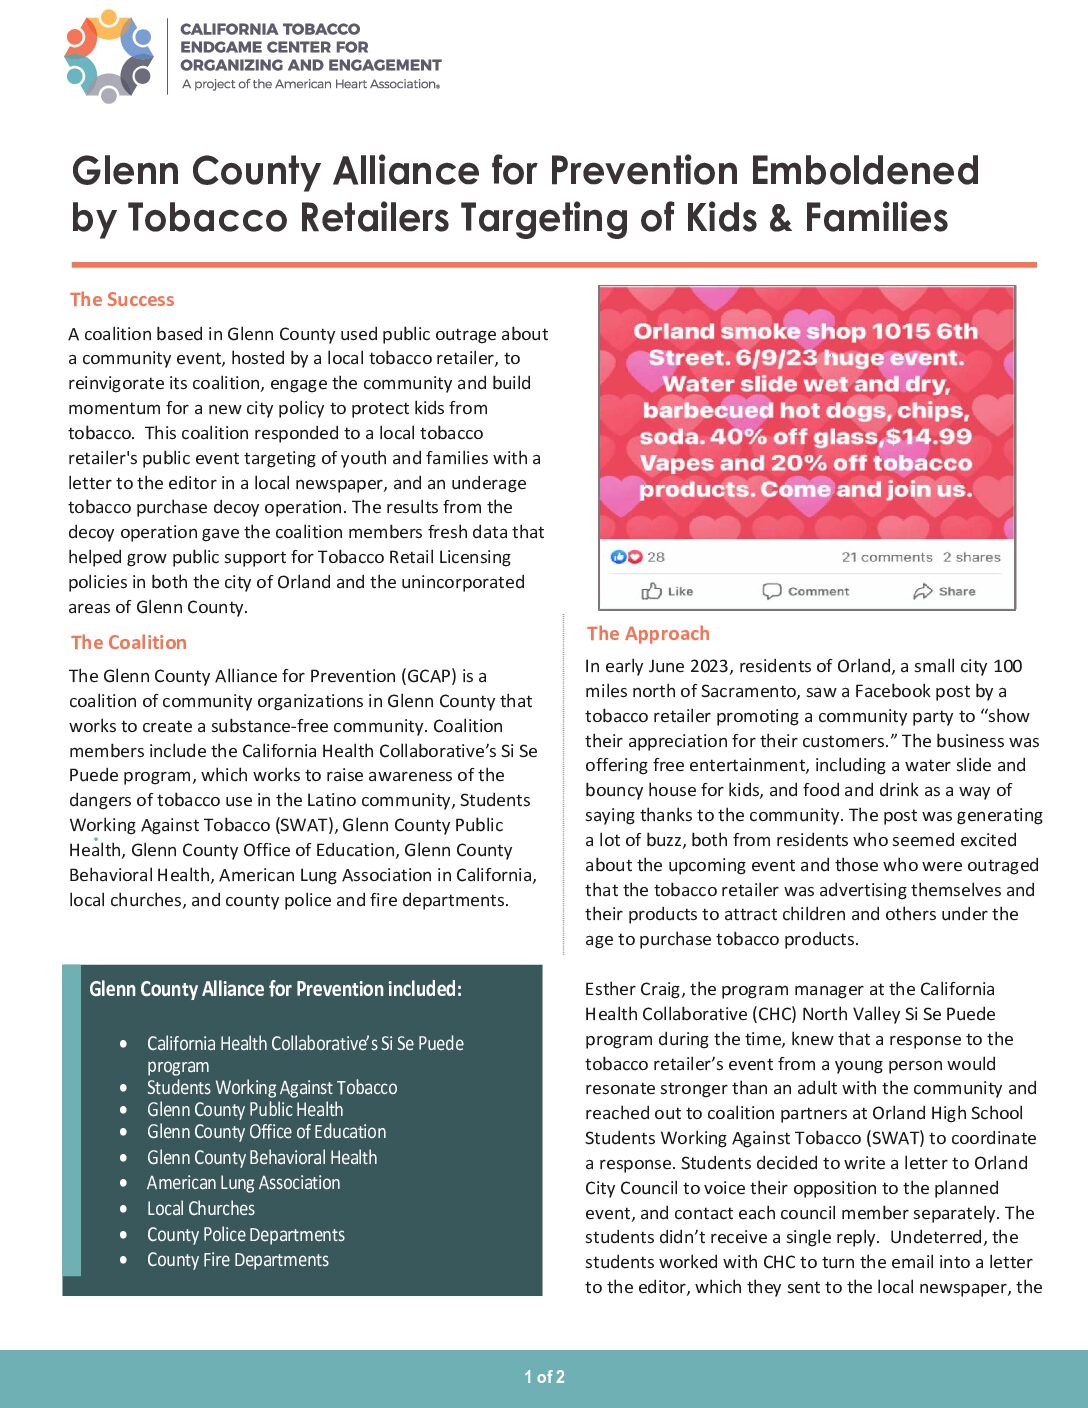 A coalition based in Glenn County used public outrage about a community event, hosted by a local tobacco retailer, to reinvigorate its coalition, engage the community and build momentum for a new city policy to protect kids from tobacco.